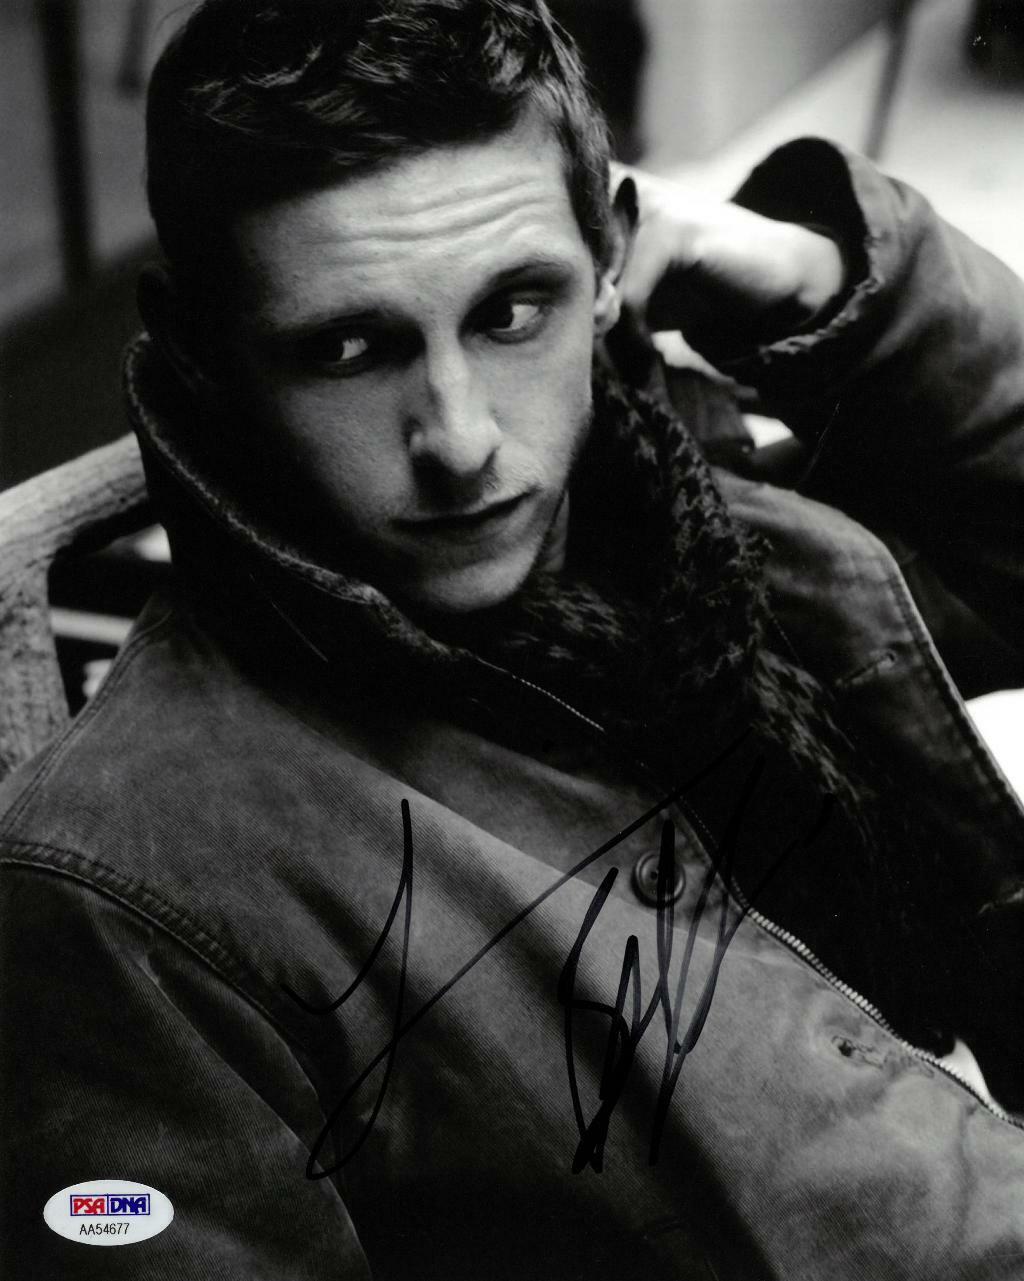 Jamie Bell Signed Authentic Autographed 8x10 B/W Photo Poster painting PSA/DNA #AA54677